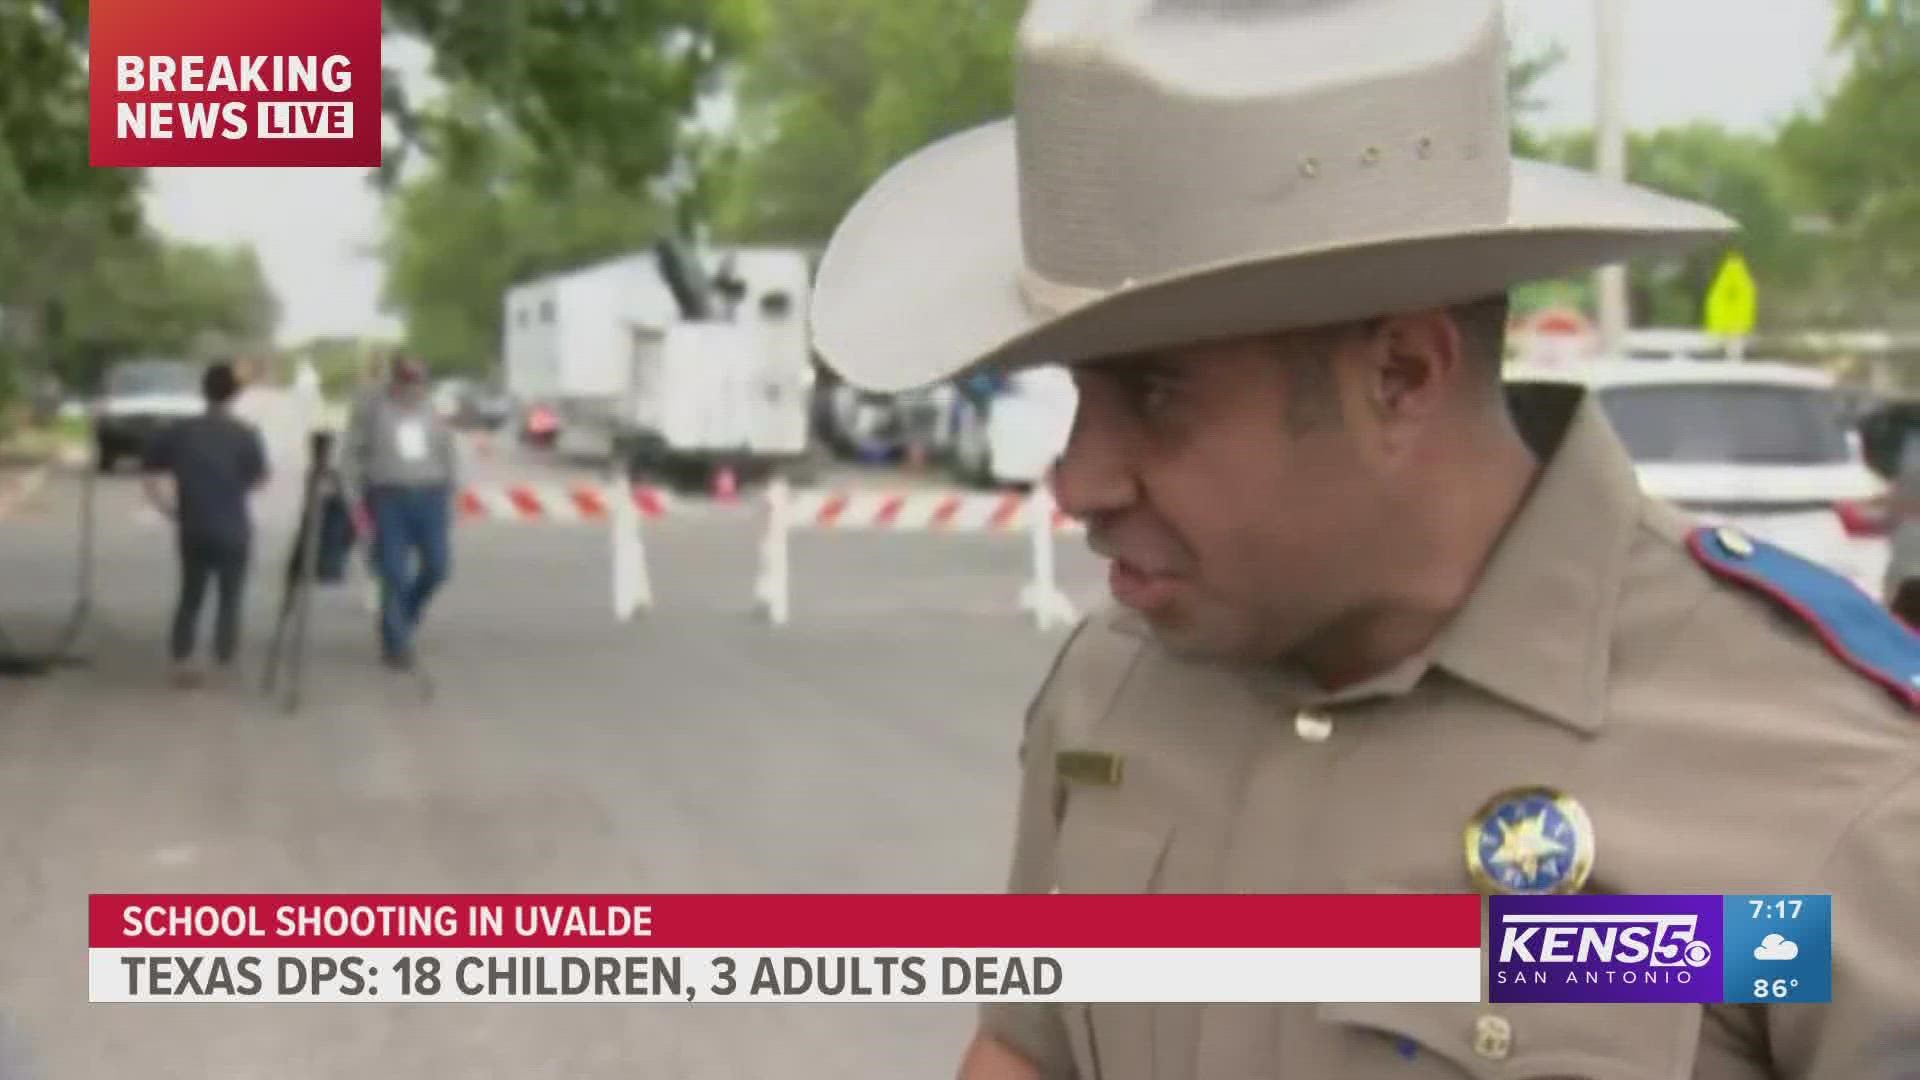 18 children and 3 adults die during mass shooting in Uvalde.